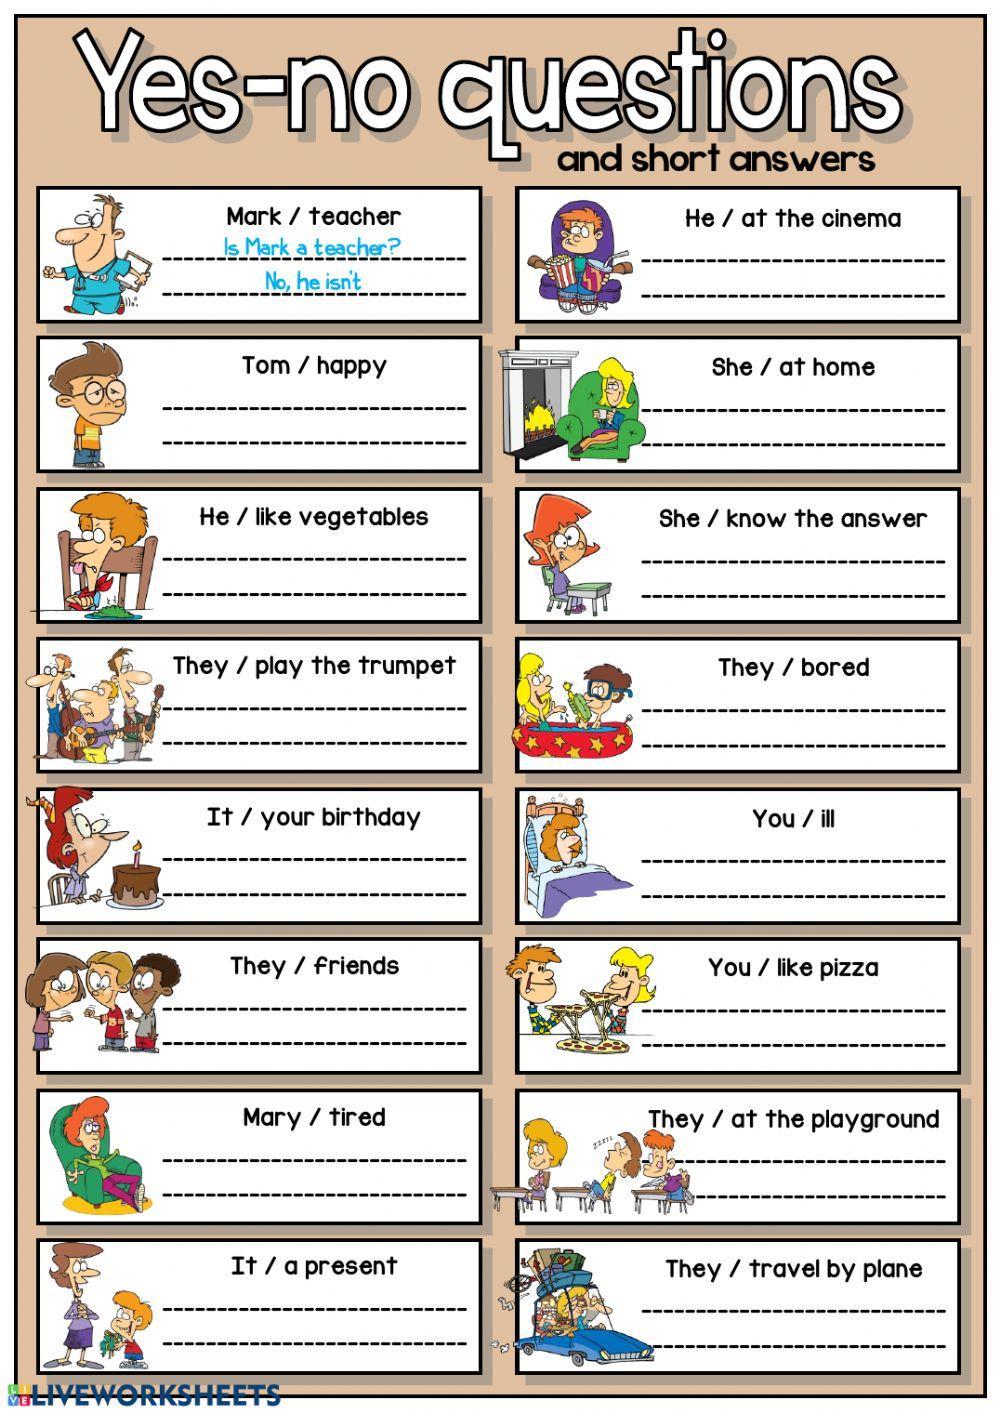 Questions diary. Вопросы Worksheets. Вопросы с is Worksheets. To be вопросы Worksheets for Kids. To be вопросы Worksheets.